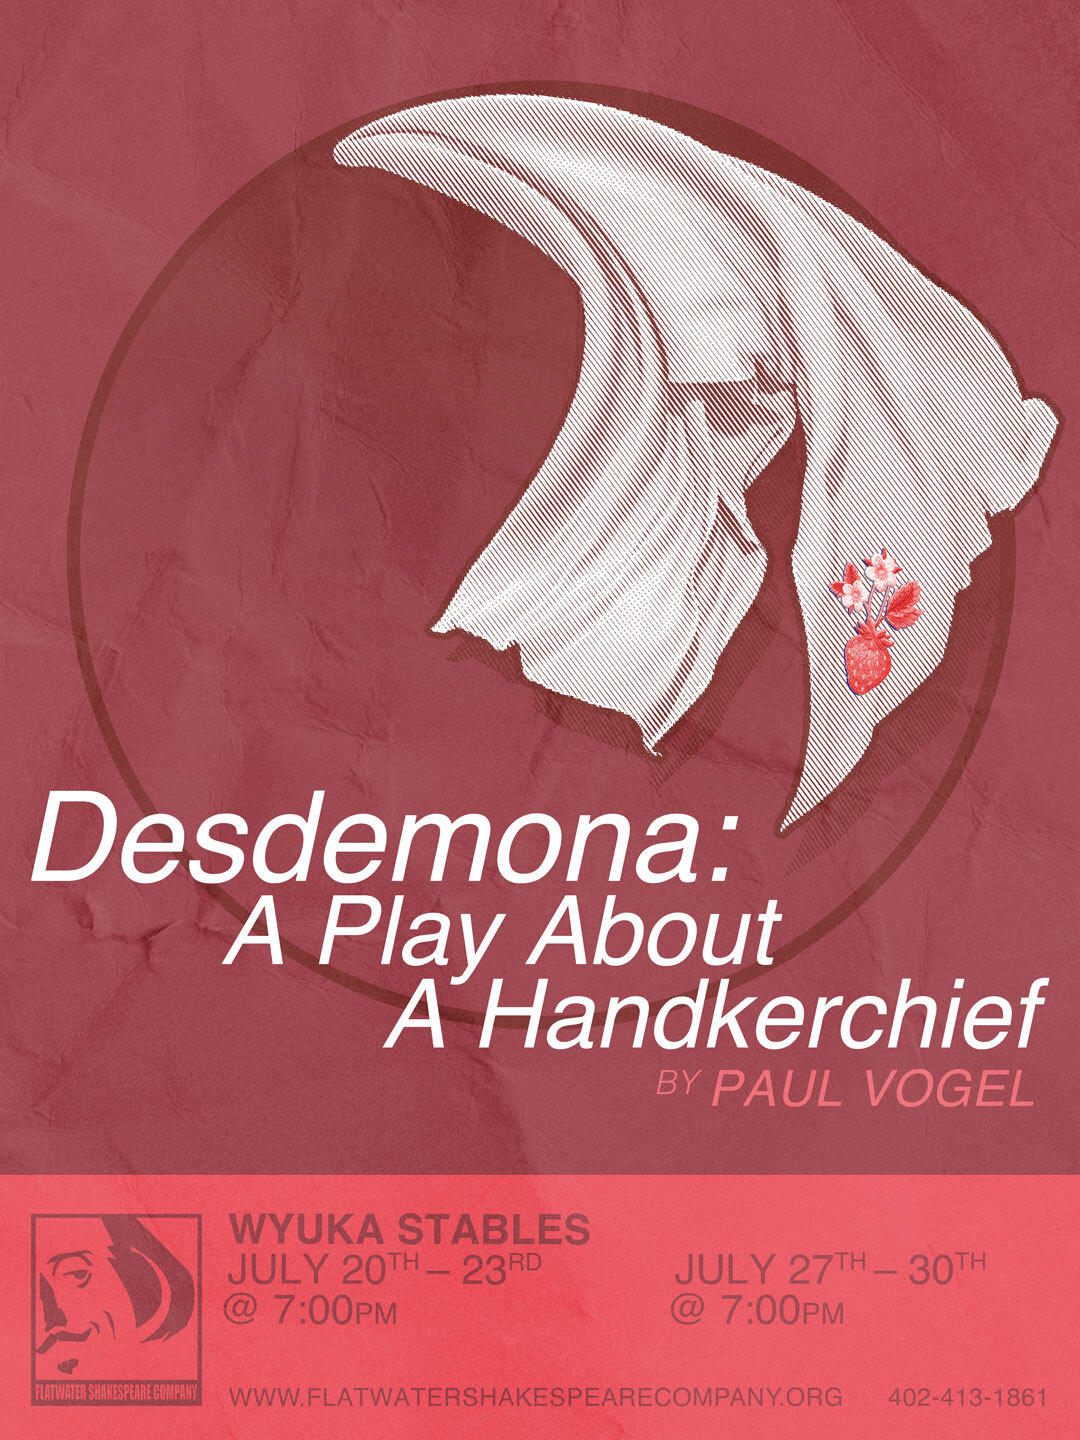 7/30 STU - STUDENT: Sun. July 30, 2023 | 7:00 p.m. - 10:00 p.m. CST | Wyuka Stables (Desdemona: A Play about a Handkerchief)